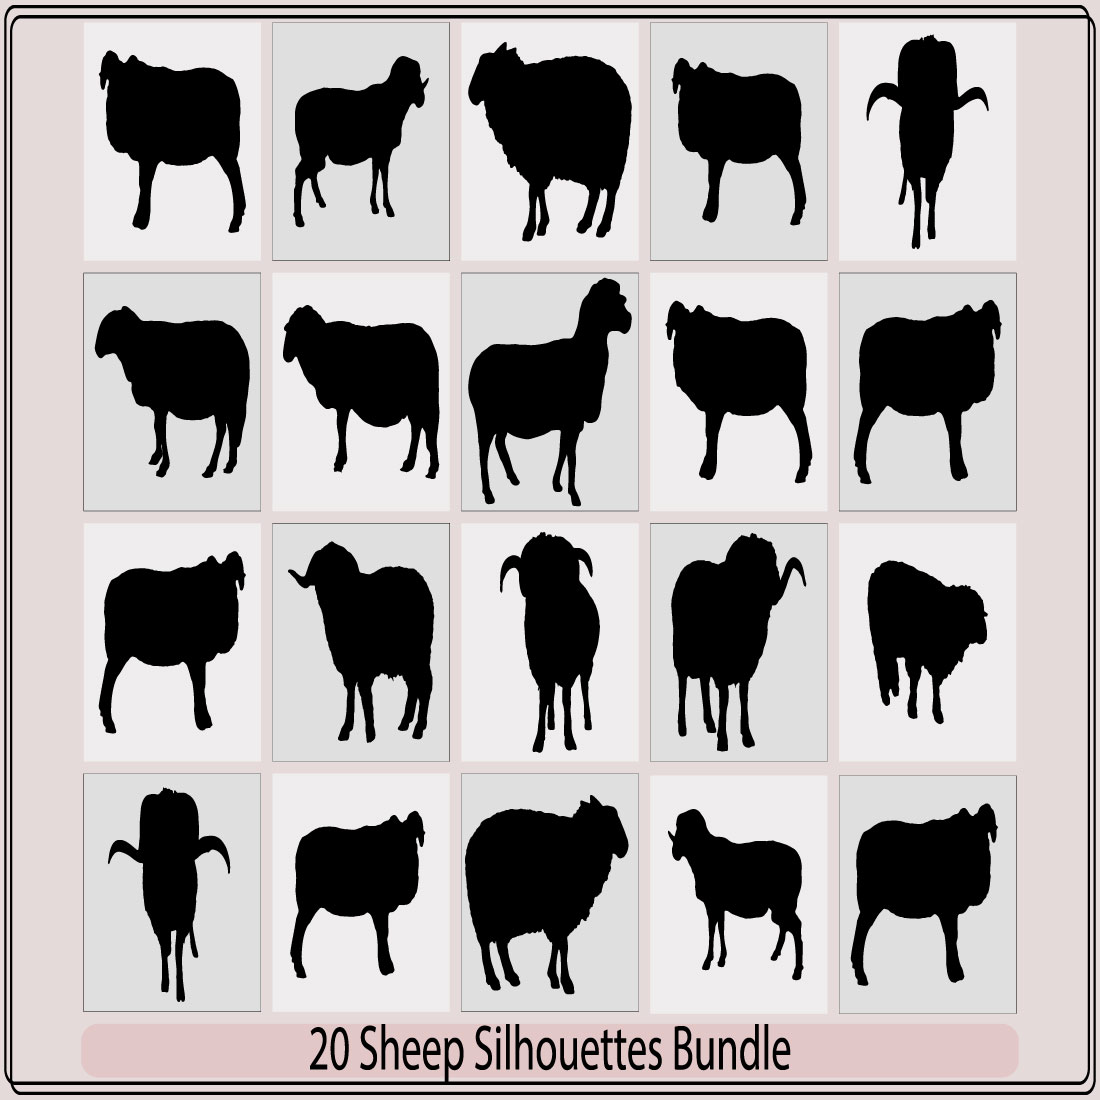 Sheep Silhouette,Sheep Icon,Sheep silhouette with standing pose,Lamb or Sheep icon, preview image.